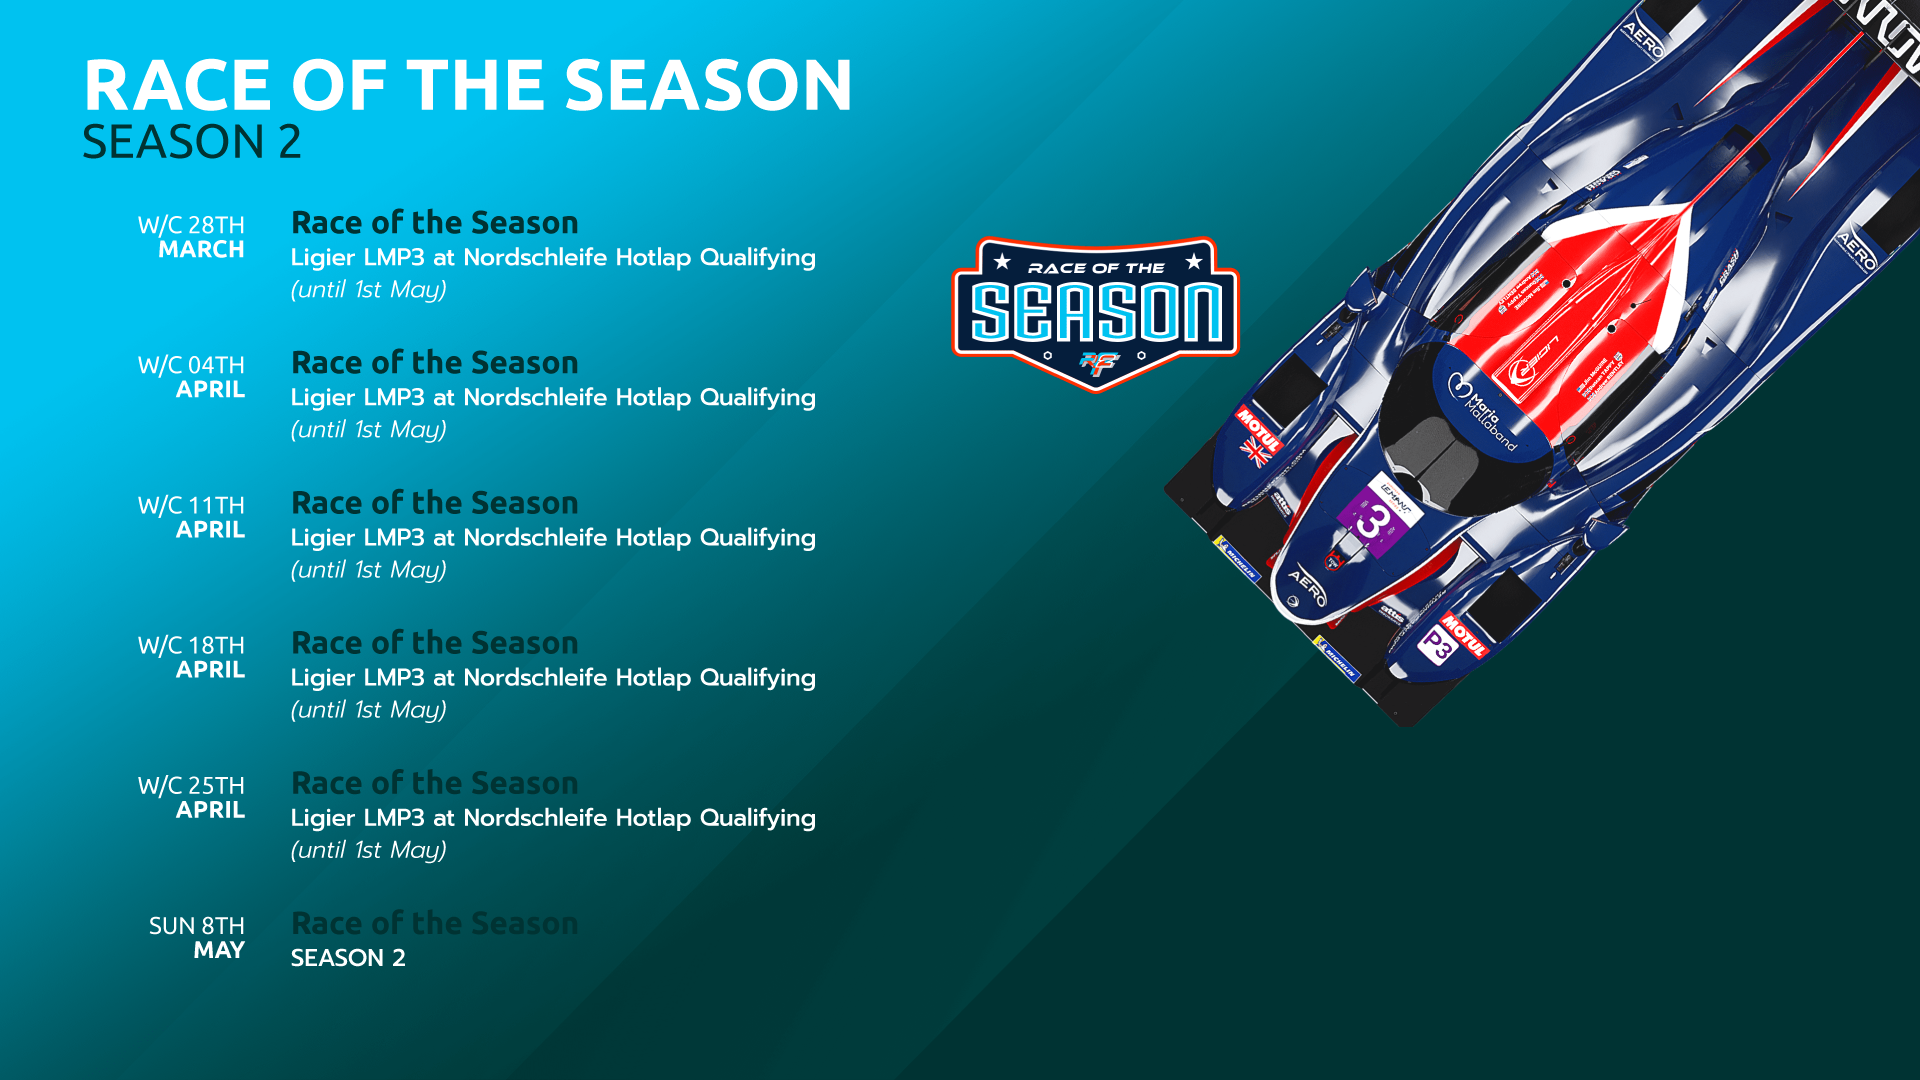 More information about "Annunciata la rFactor 2 Competition System Season 2"